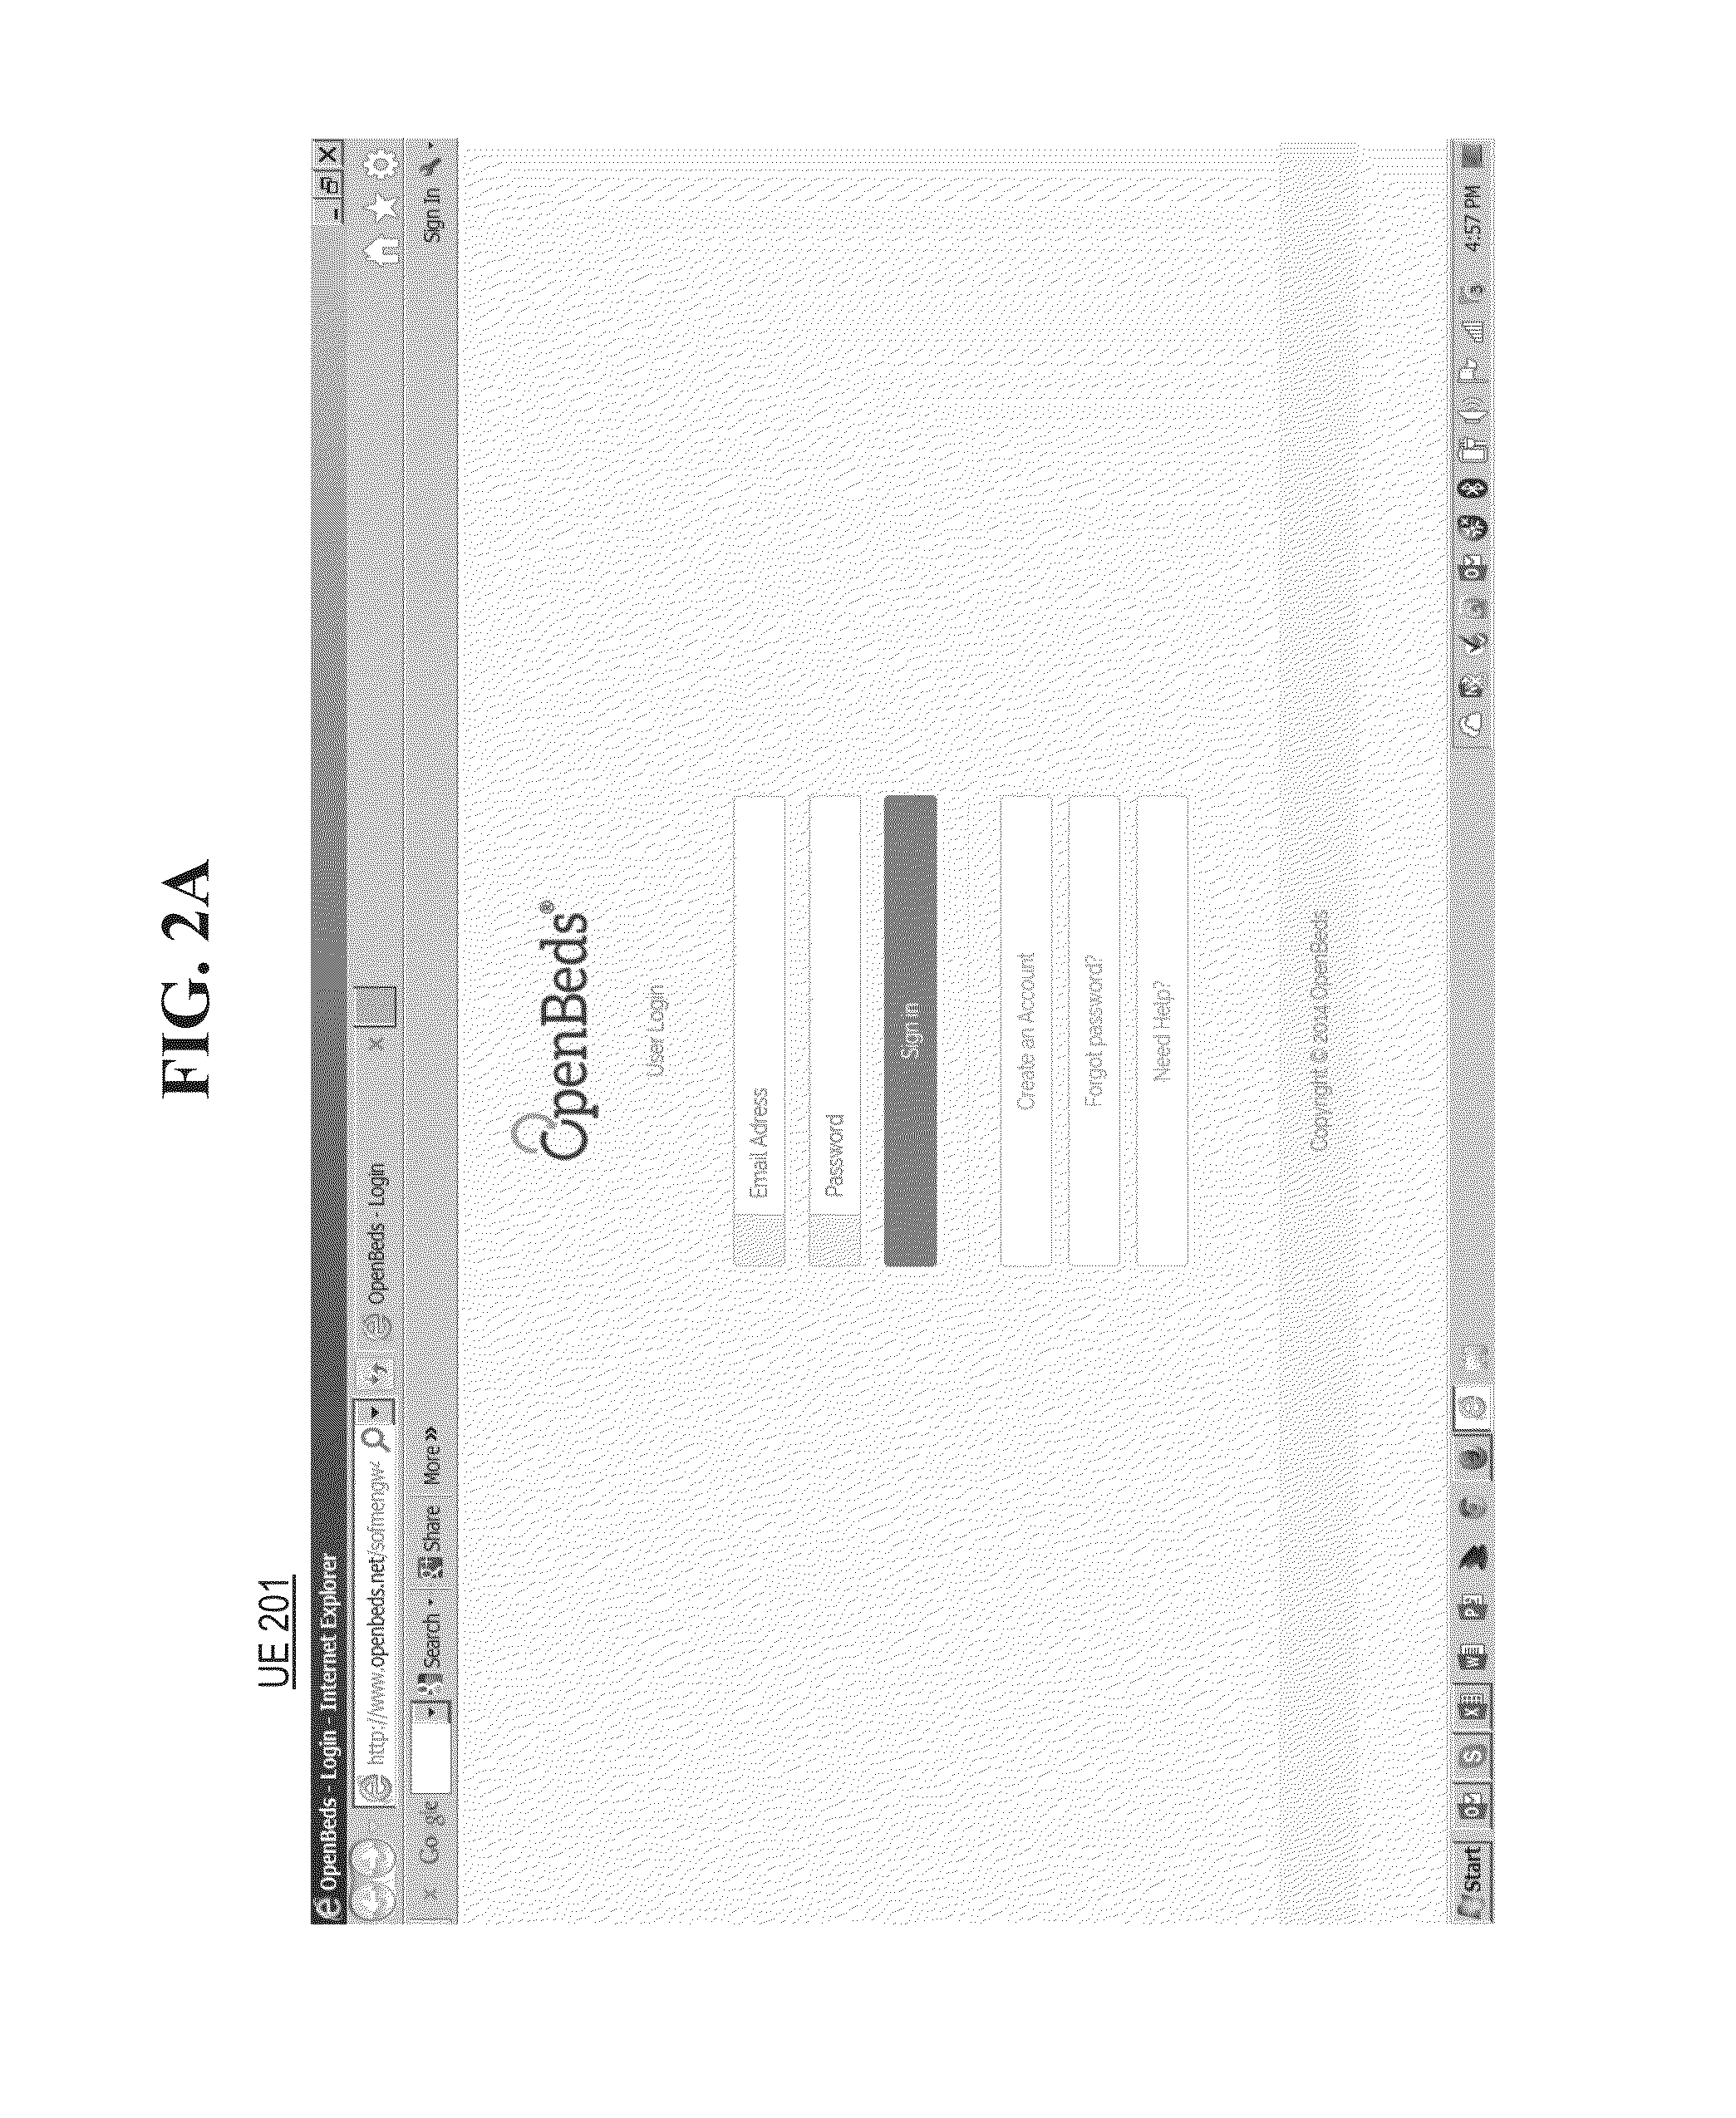 System and method for criteria-based optimized transfer of physical objects or people between different geographic locations including an exemplary embodiment for patients transfer between health care facilities